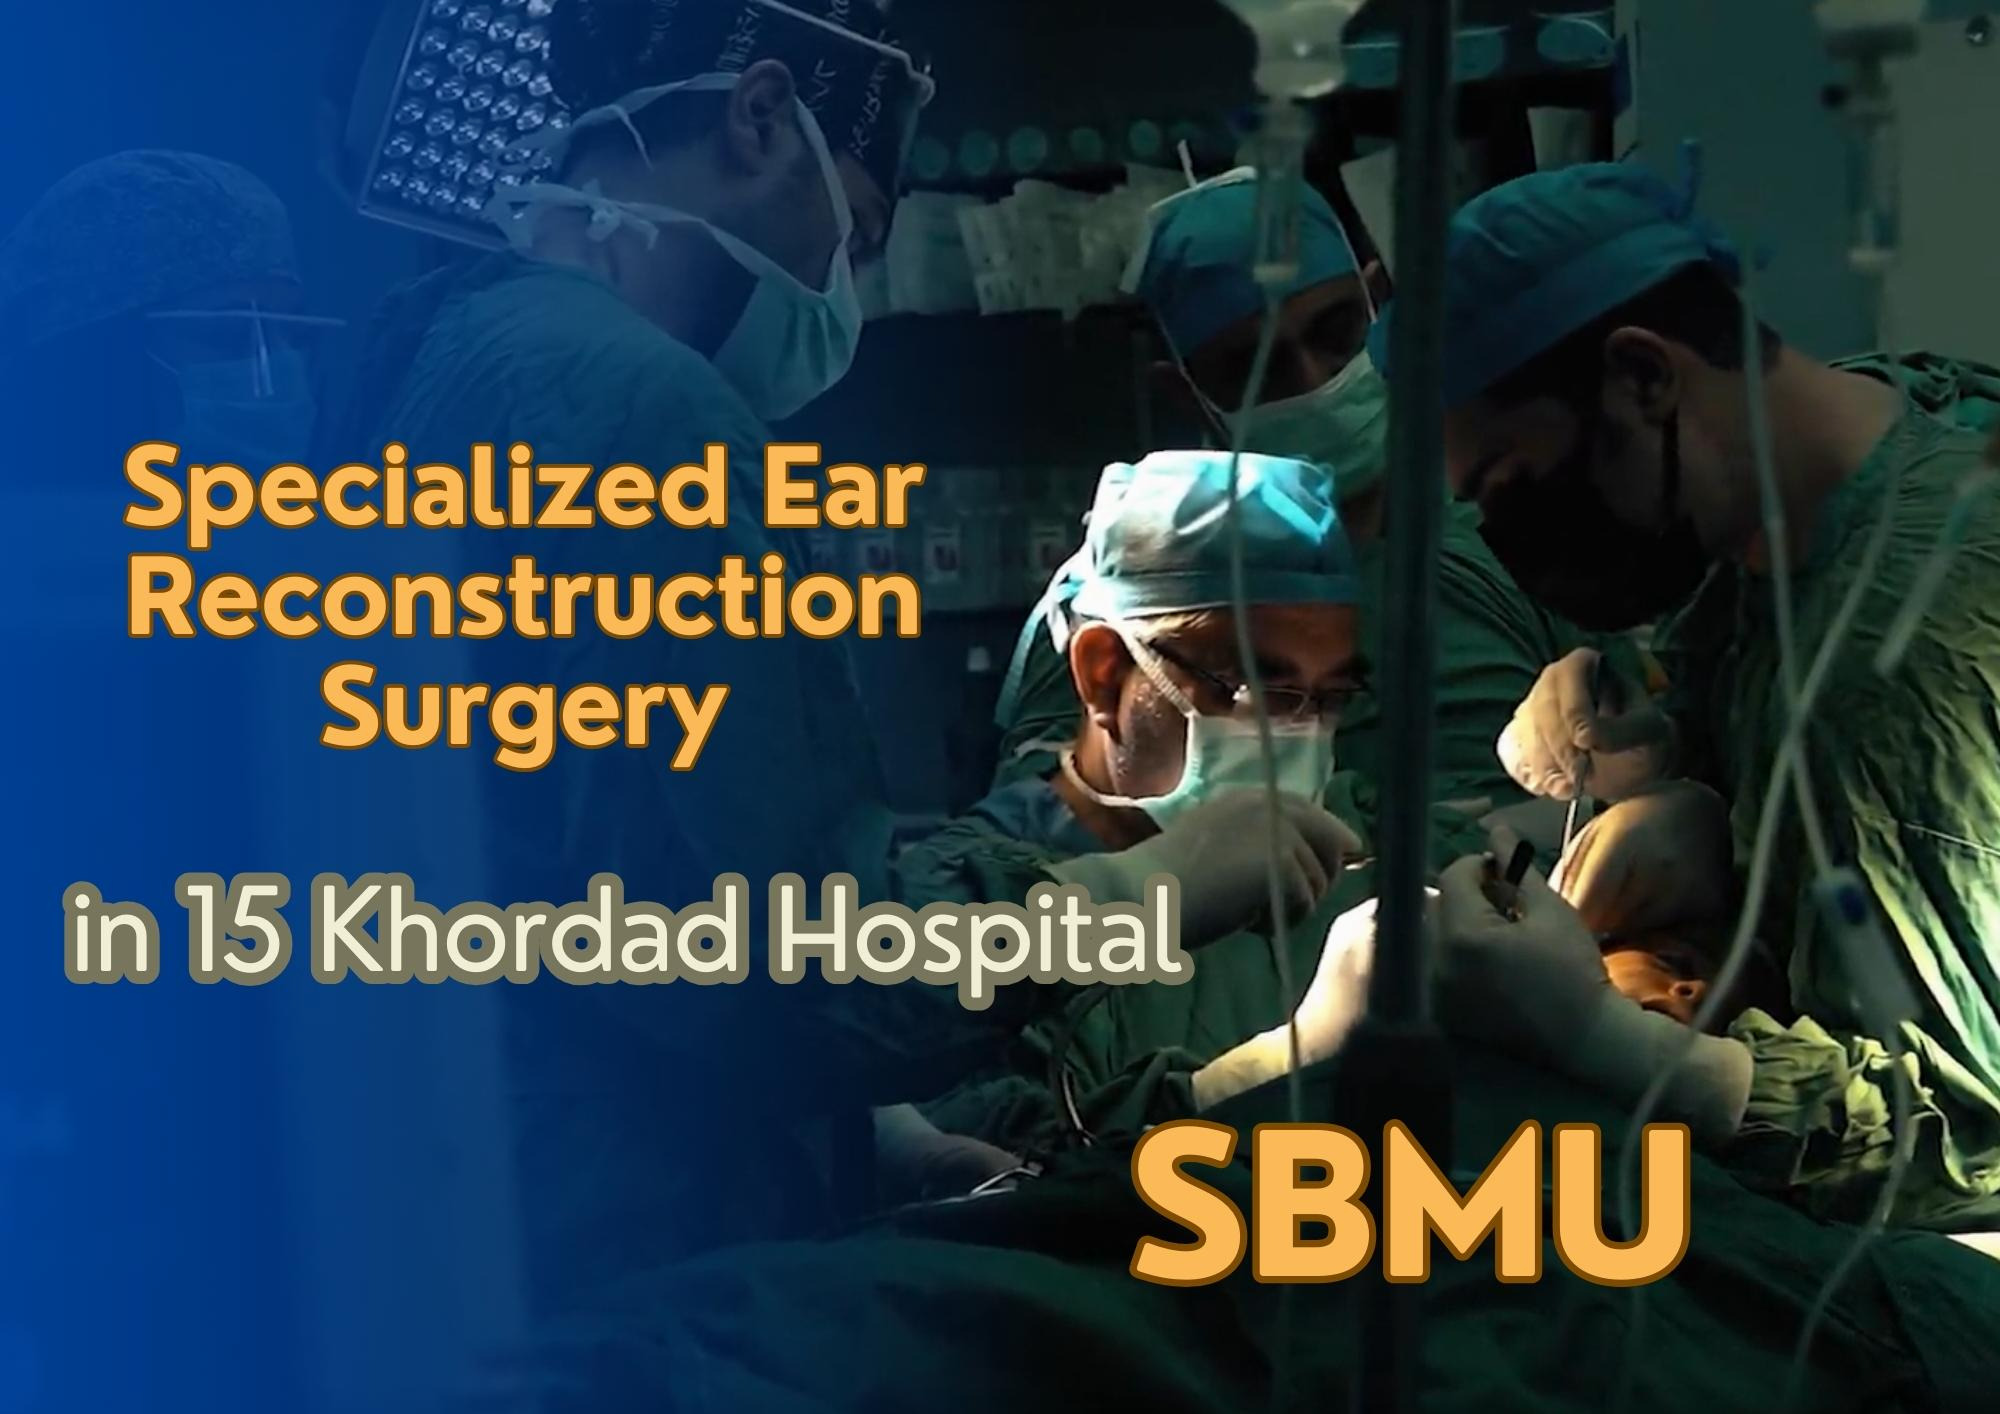 Specialized ear reconstruction surgery